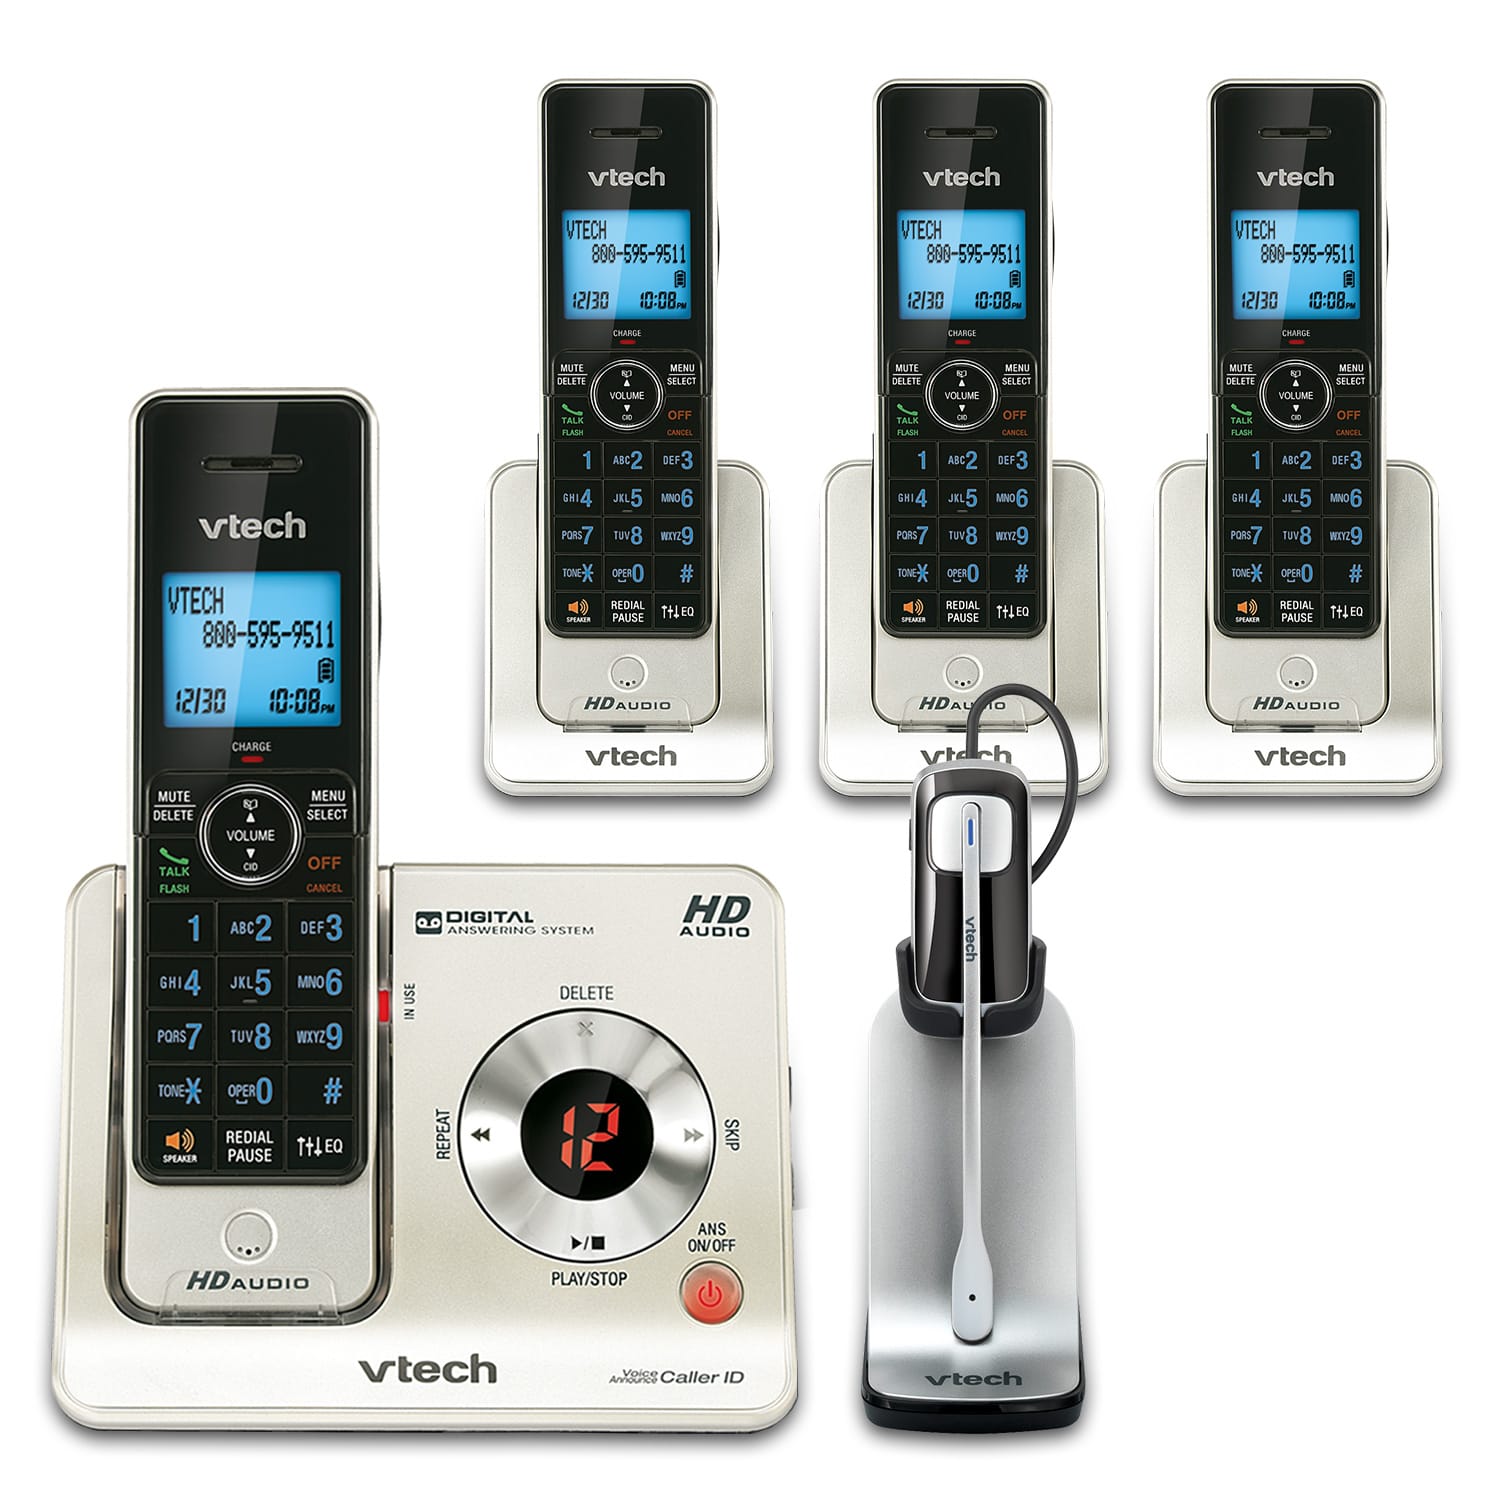 2 LS6405 Vtech Voice ID Answering System 4 Cordless Phones & Headset LS6475-3 